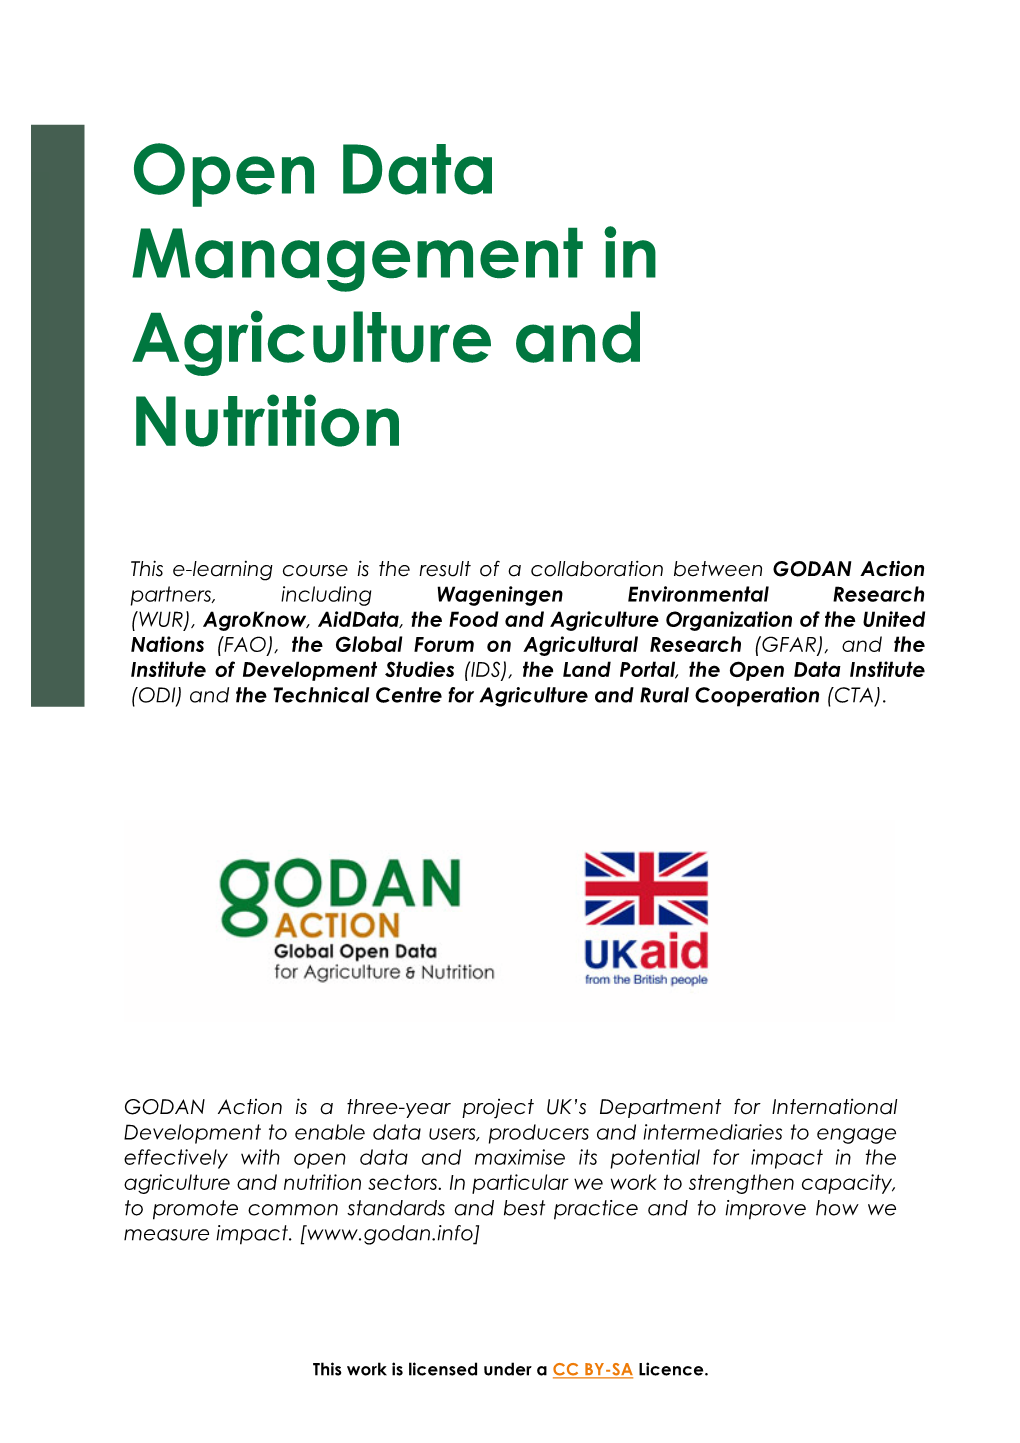 Open Data Management in Agriculture and Nutrition